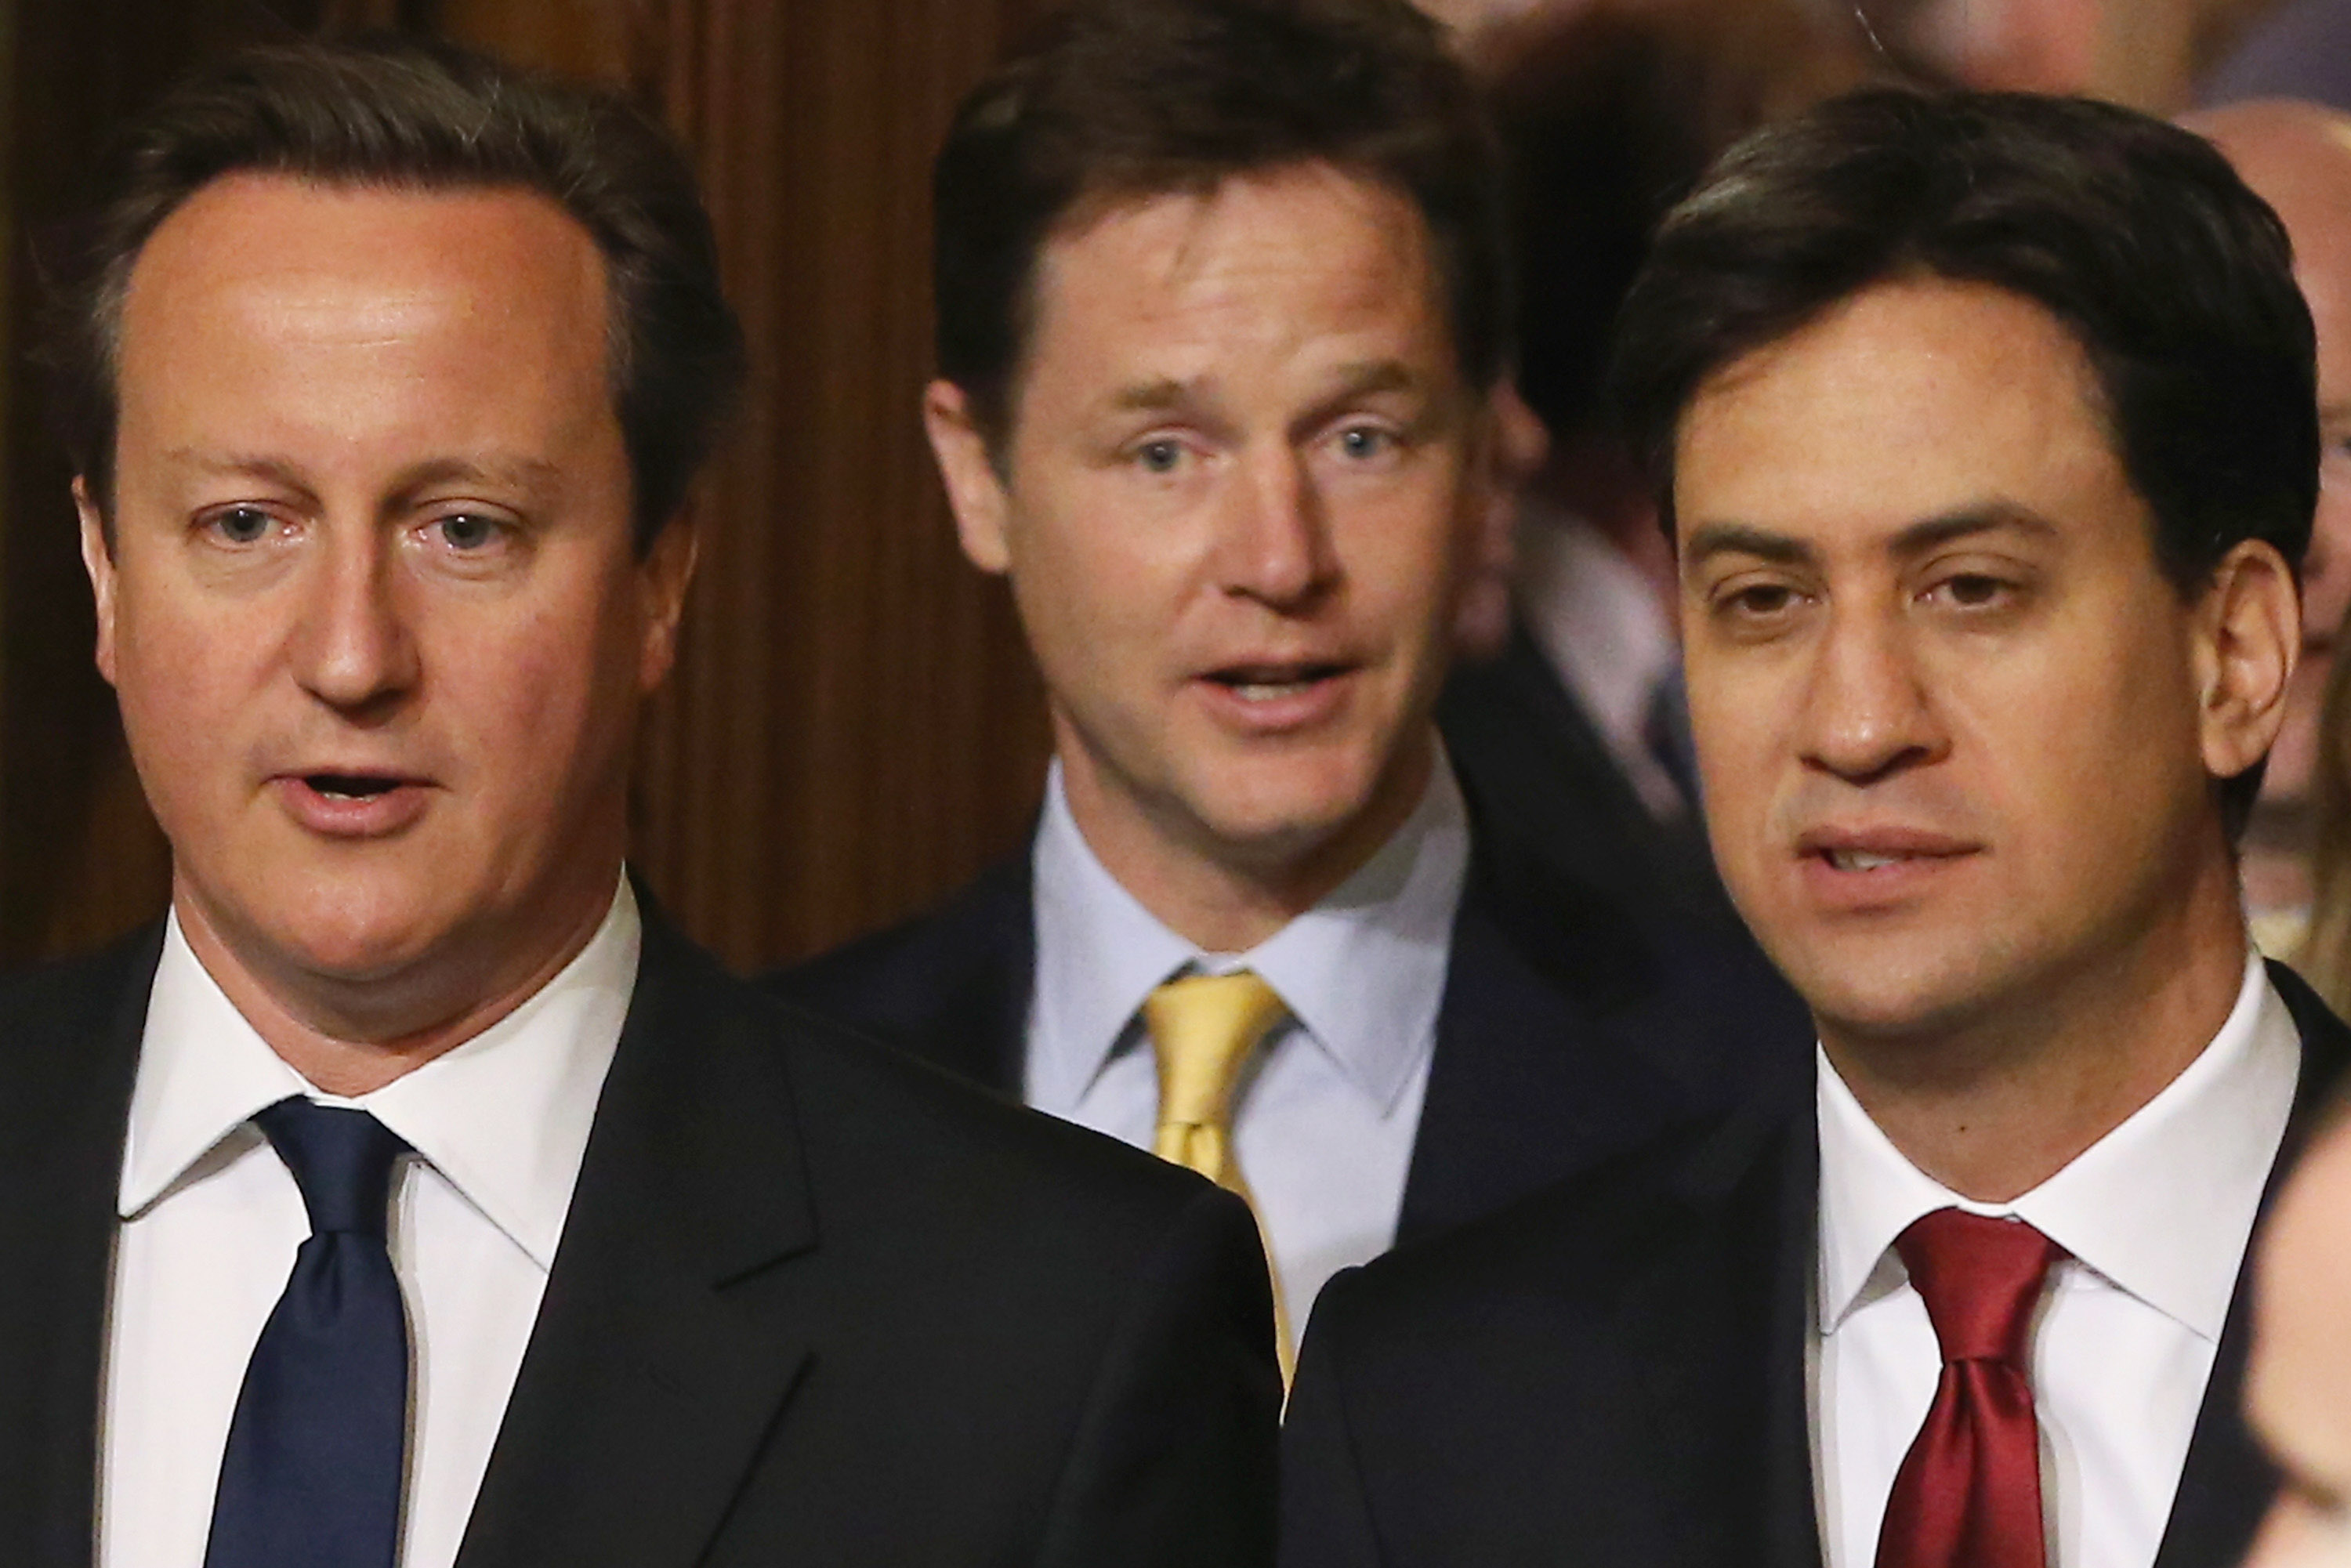 British Prime Minister David Cameron (L)  Deputy Prime Minister and leader of the Liberal Democrats Nick Clegg (C) Leader of the Labour Party Ed Miliband (R) walk through the Members' Lobby of Parliament  on June 4, 2014 in London, England. (Dan Kitwood—Getty Images)